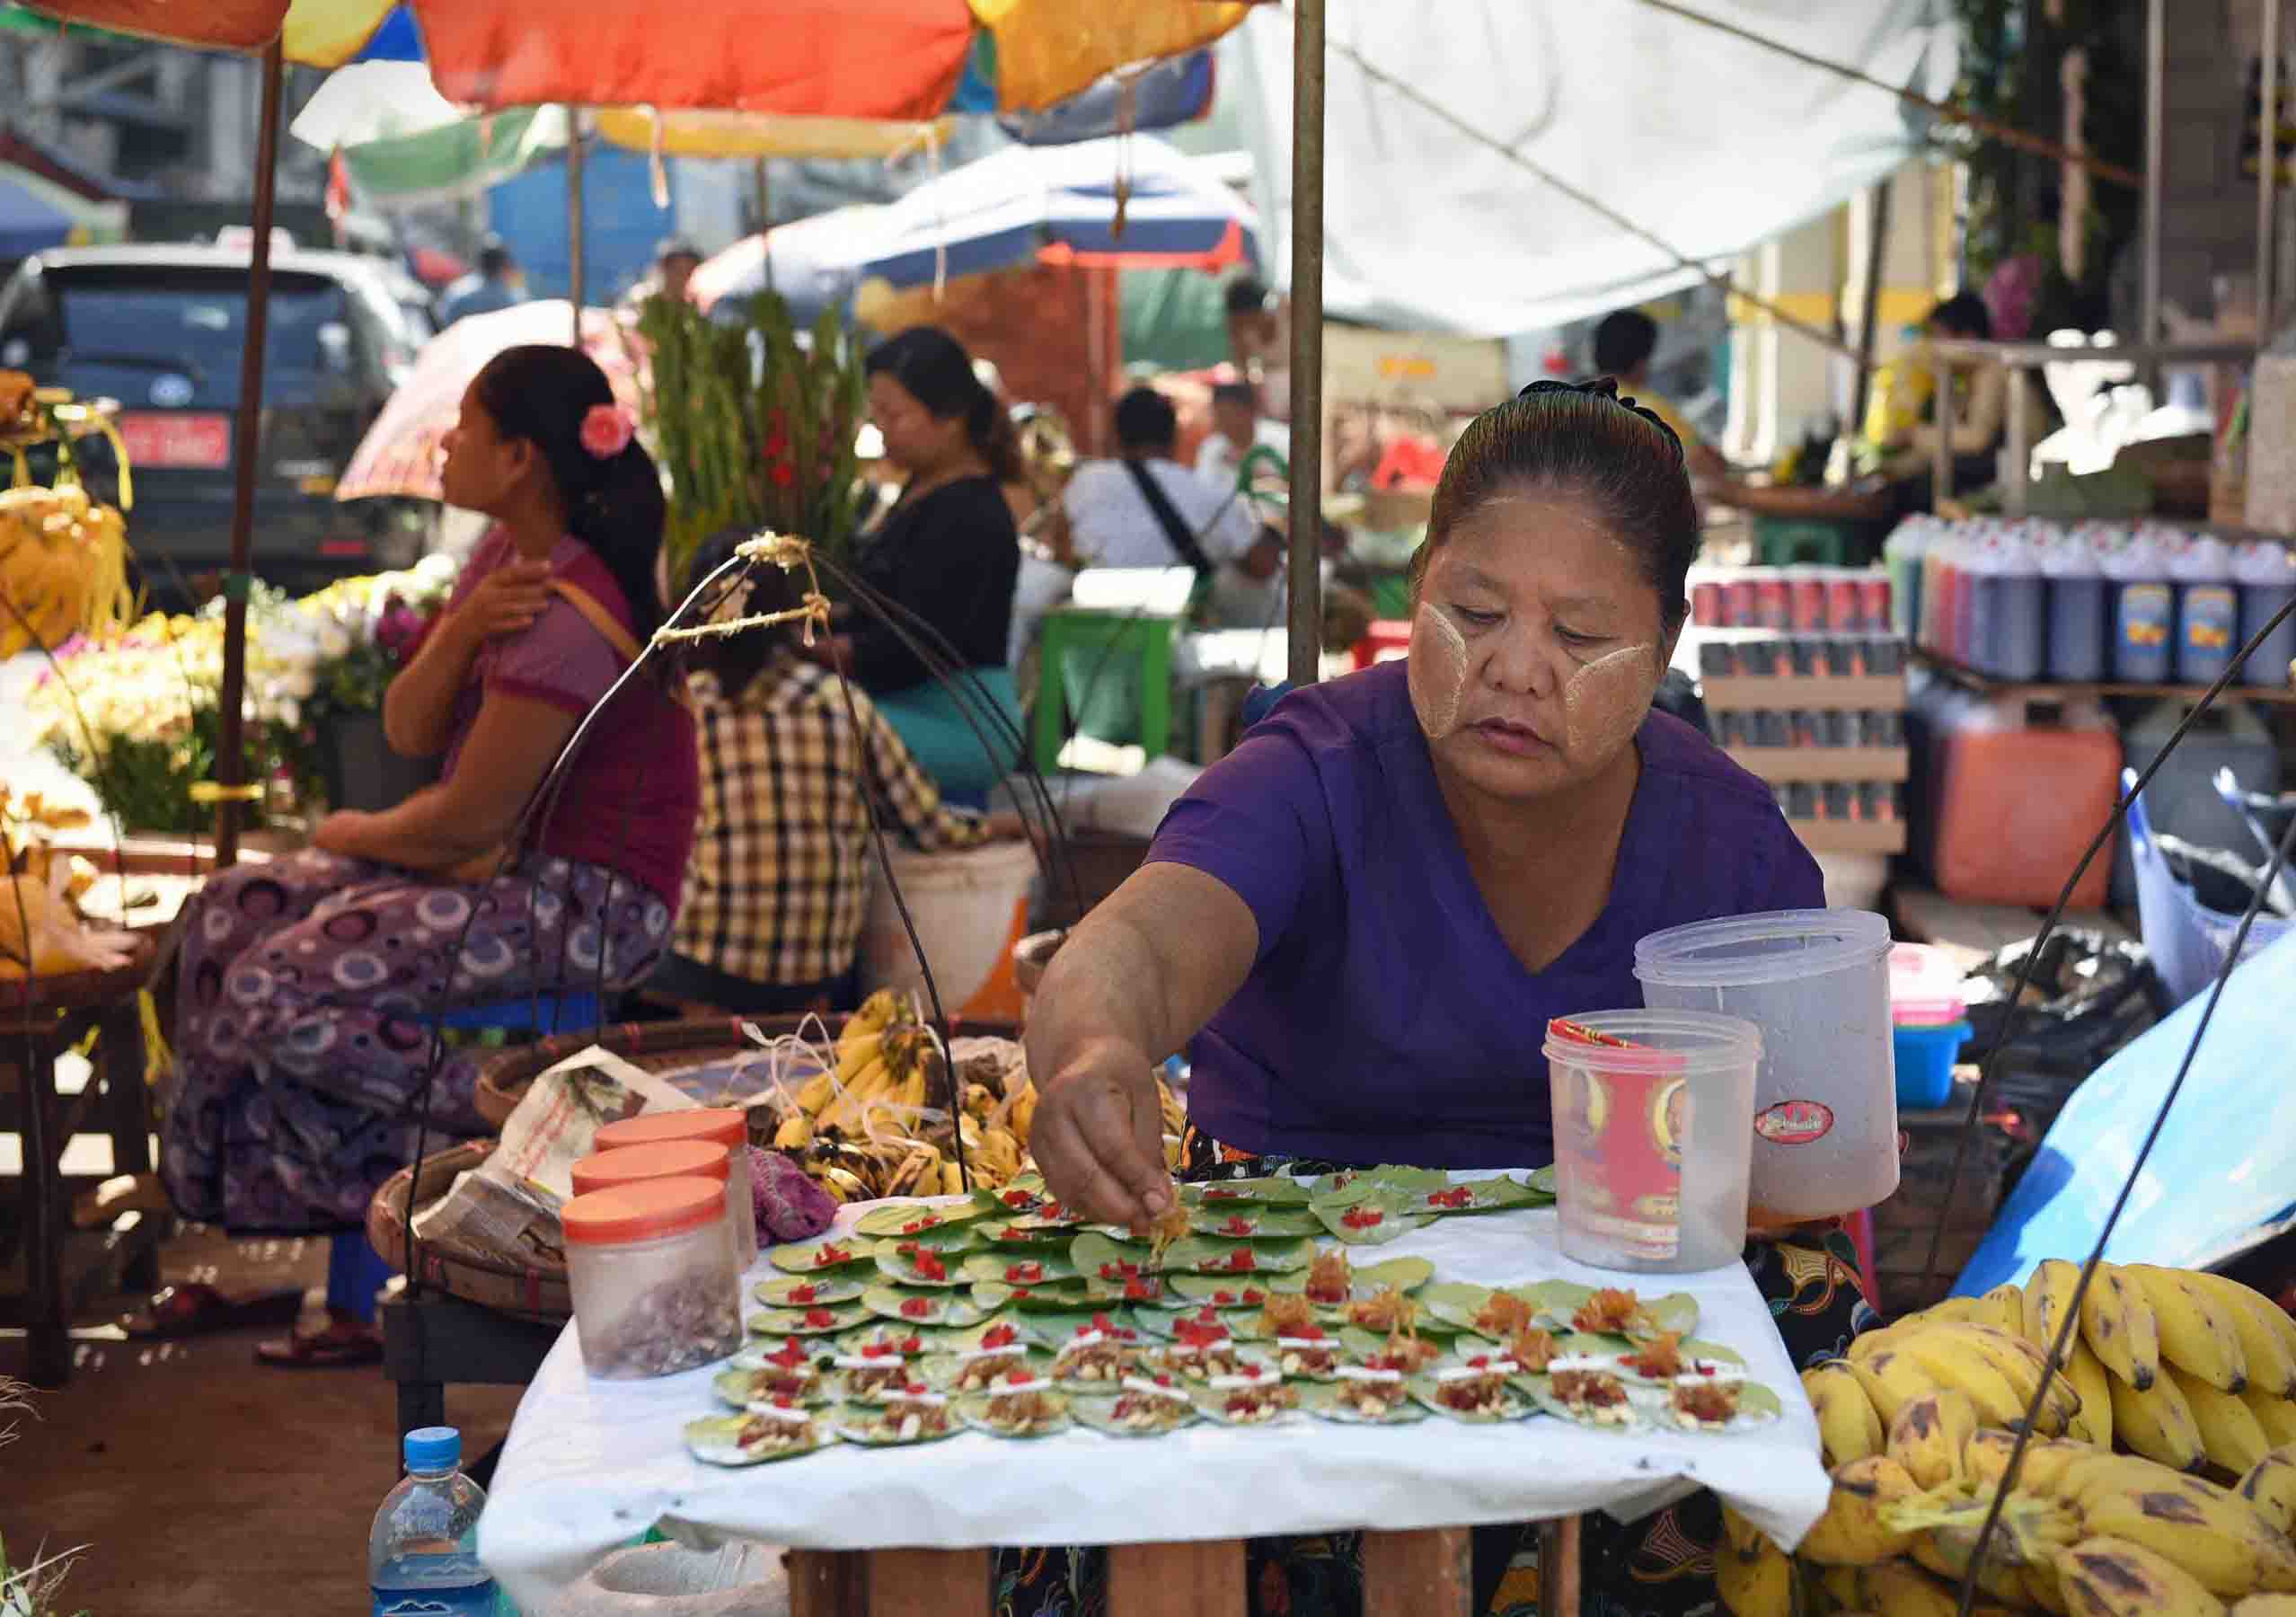 Making paan, a Burmese snack with areca nut wrapped in betel leaves. (Photo: Naomi Hellmann)